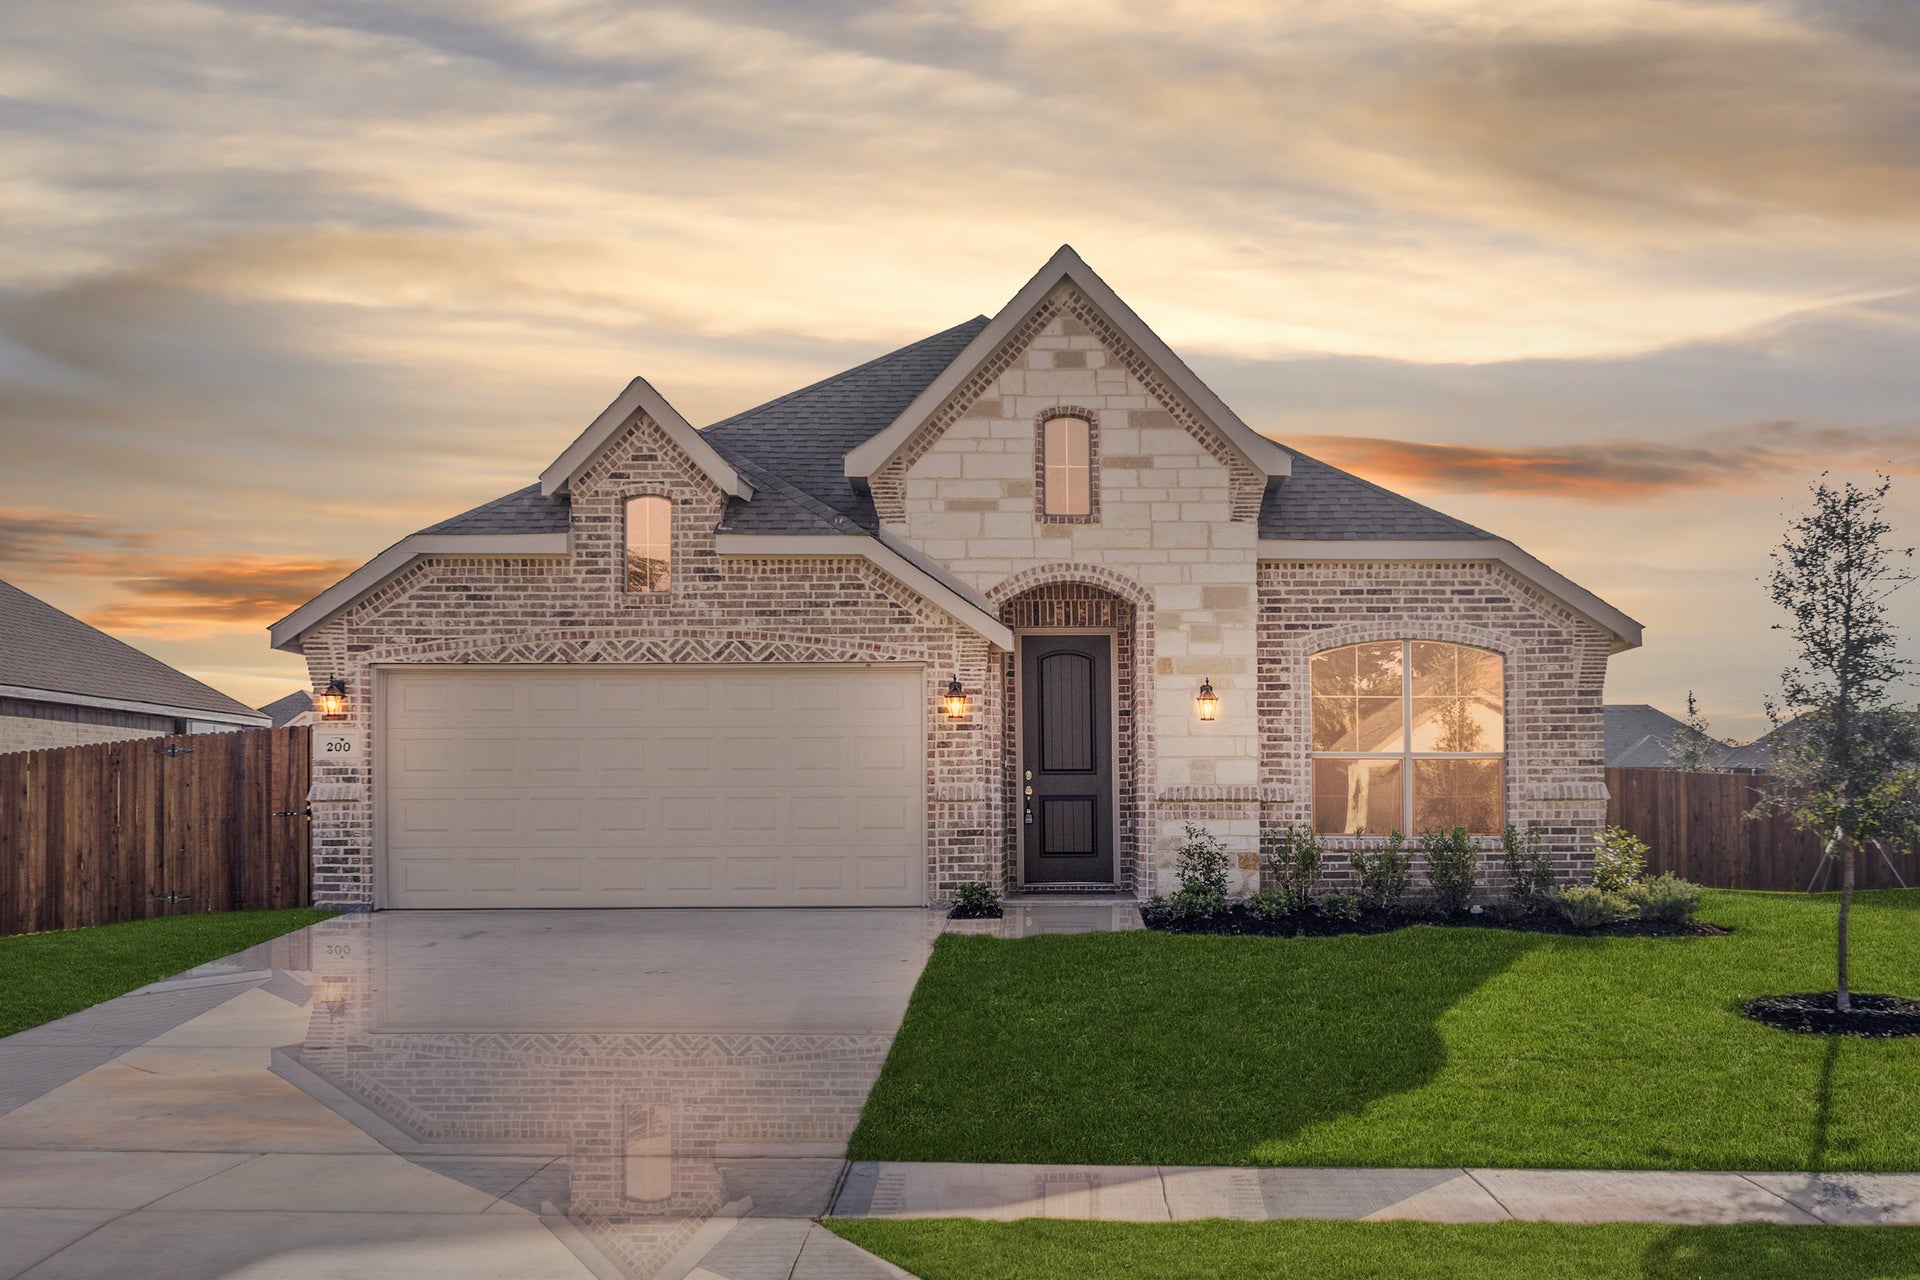 1912 C with Stone. 4br New Home in Crowley, TX